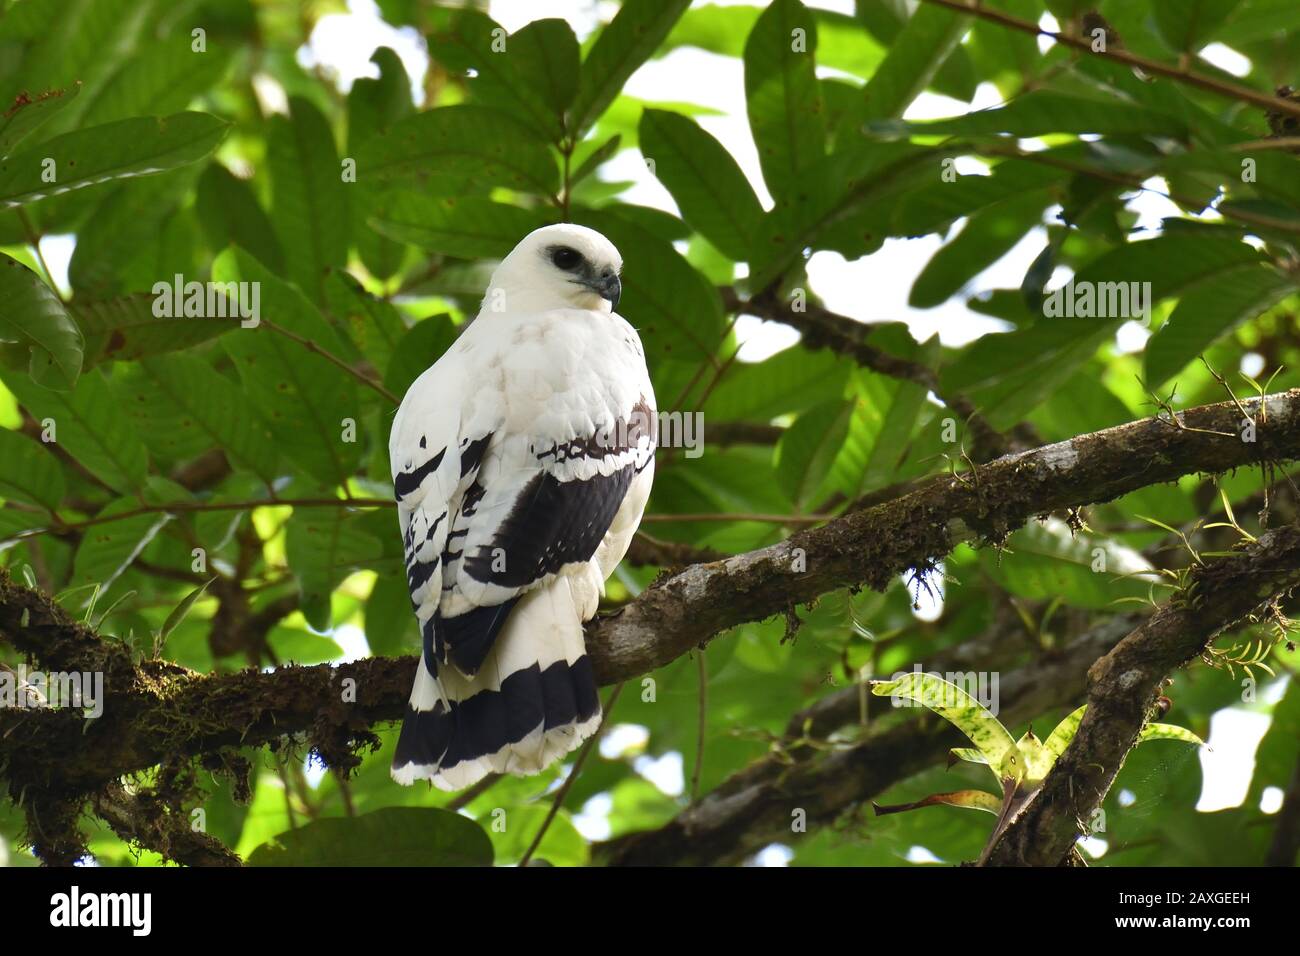 White Hawk Costa Rica Banque D'Images